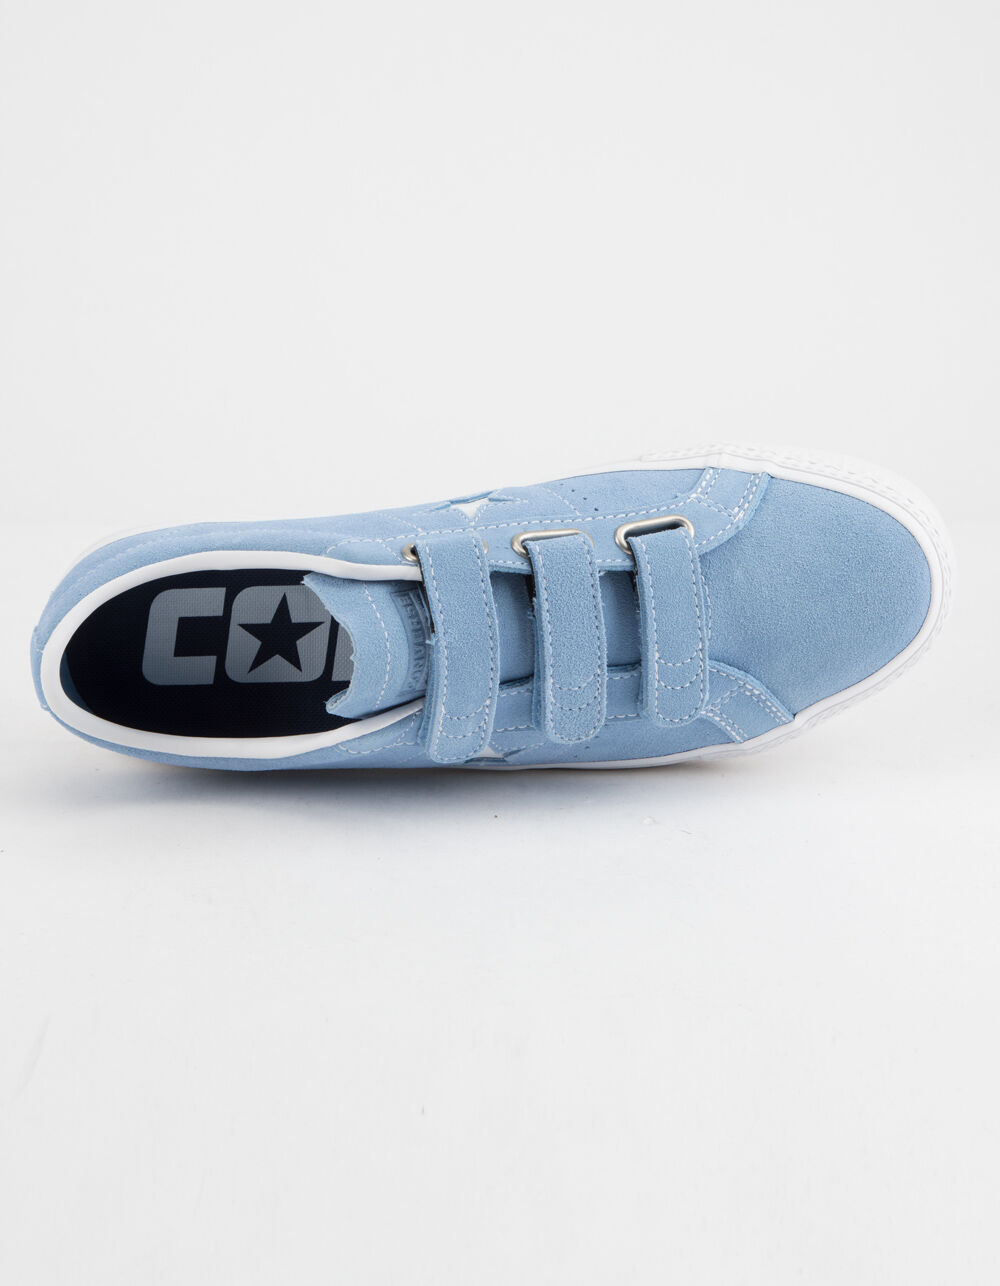 CONVERSE One Star Pro 3v Ox Light Blue & White Velcro Shoes image number 2